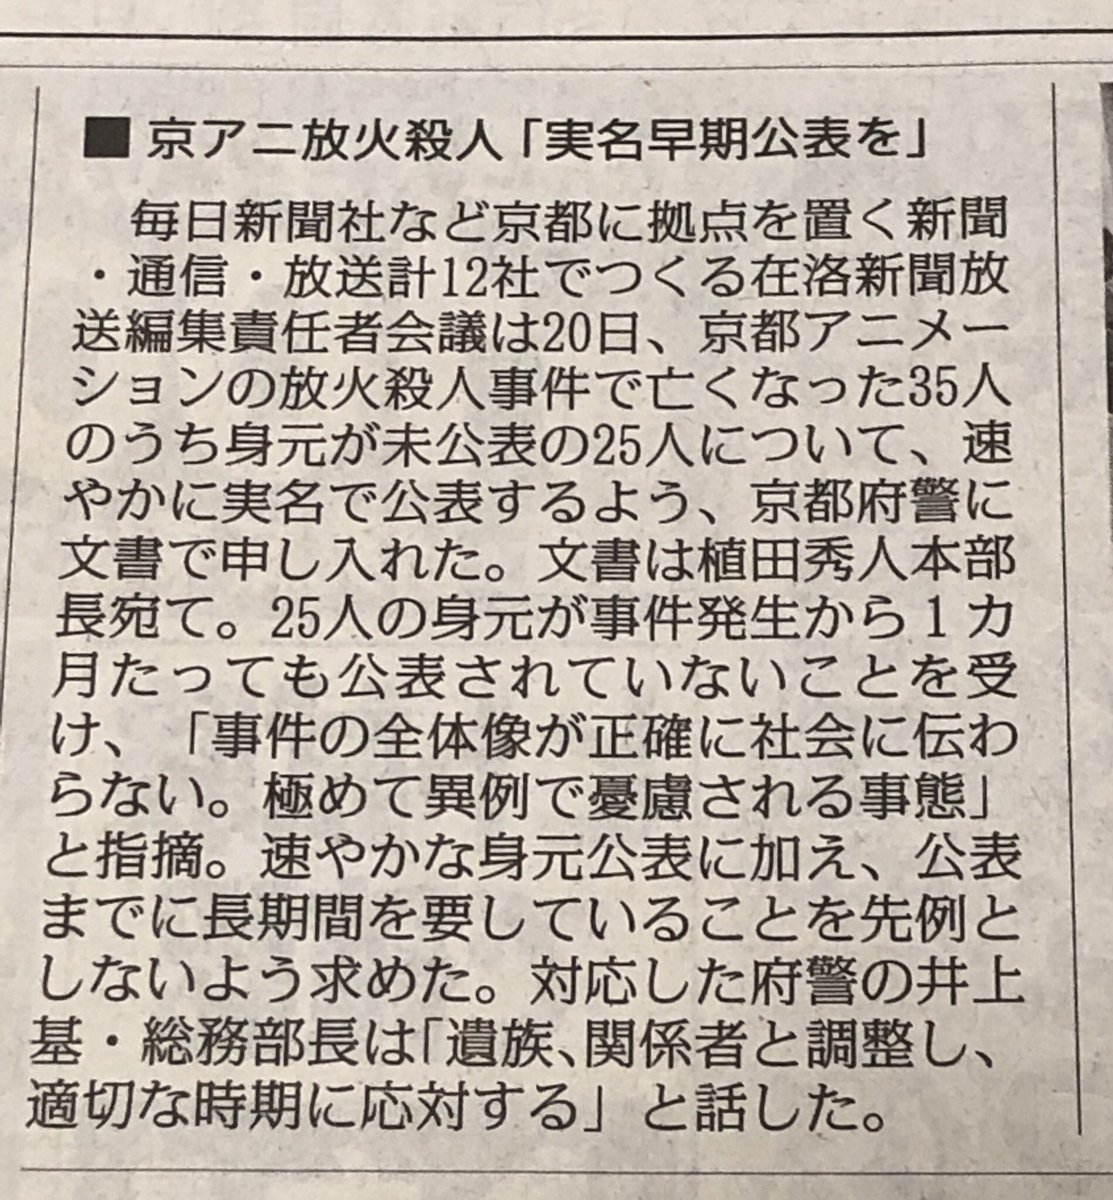 [Pickup] If the identity of the victims of Kyoto Animation is not disclosed, “If the whole picture of the incident cannot be accurately communicated to society,” isn't there a problem in the way of reporting rather than whether it is published or not?